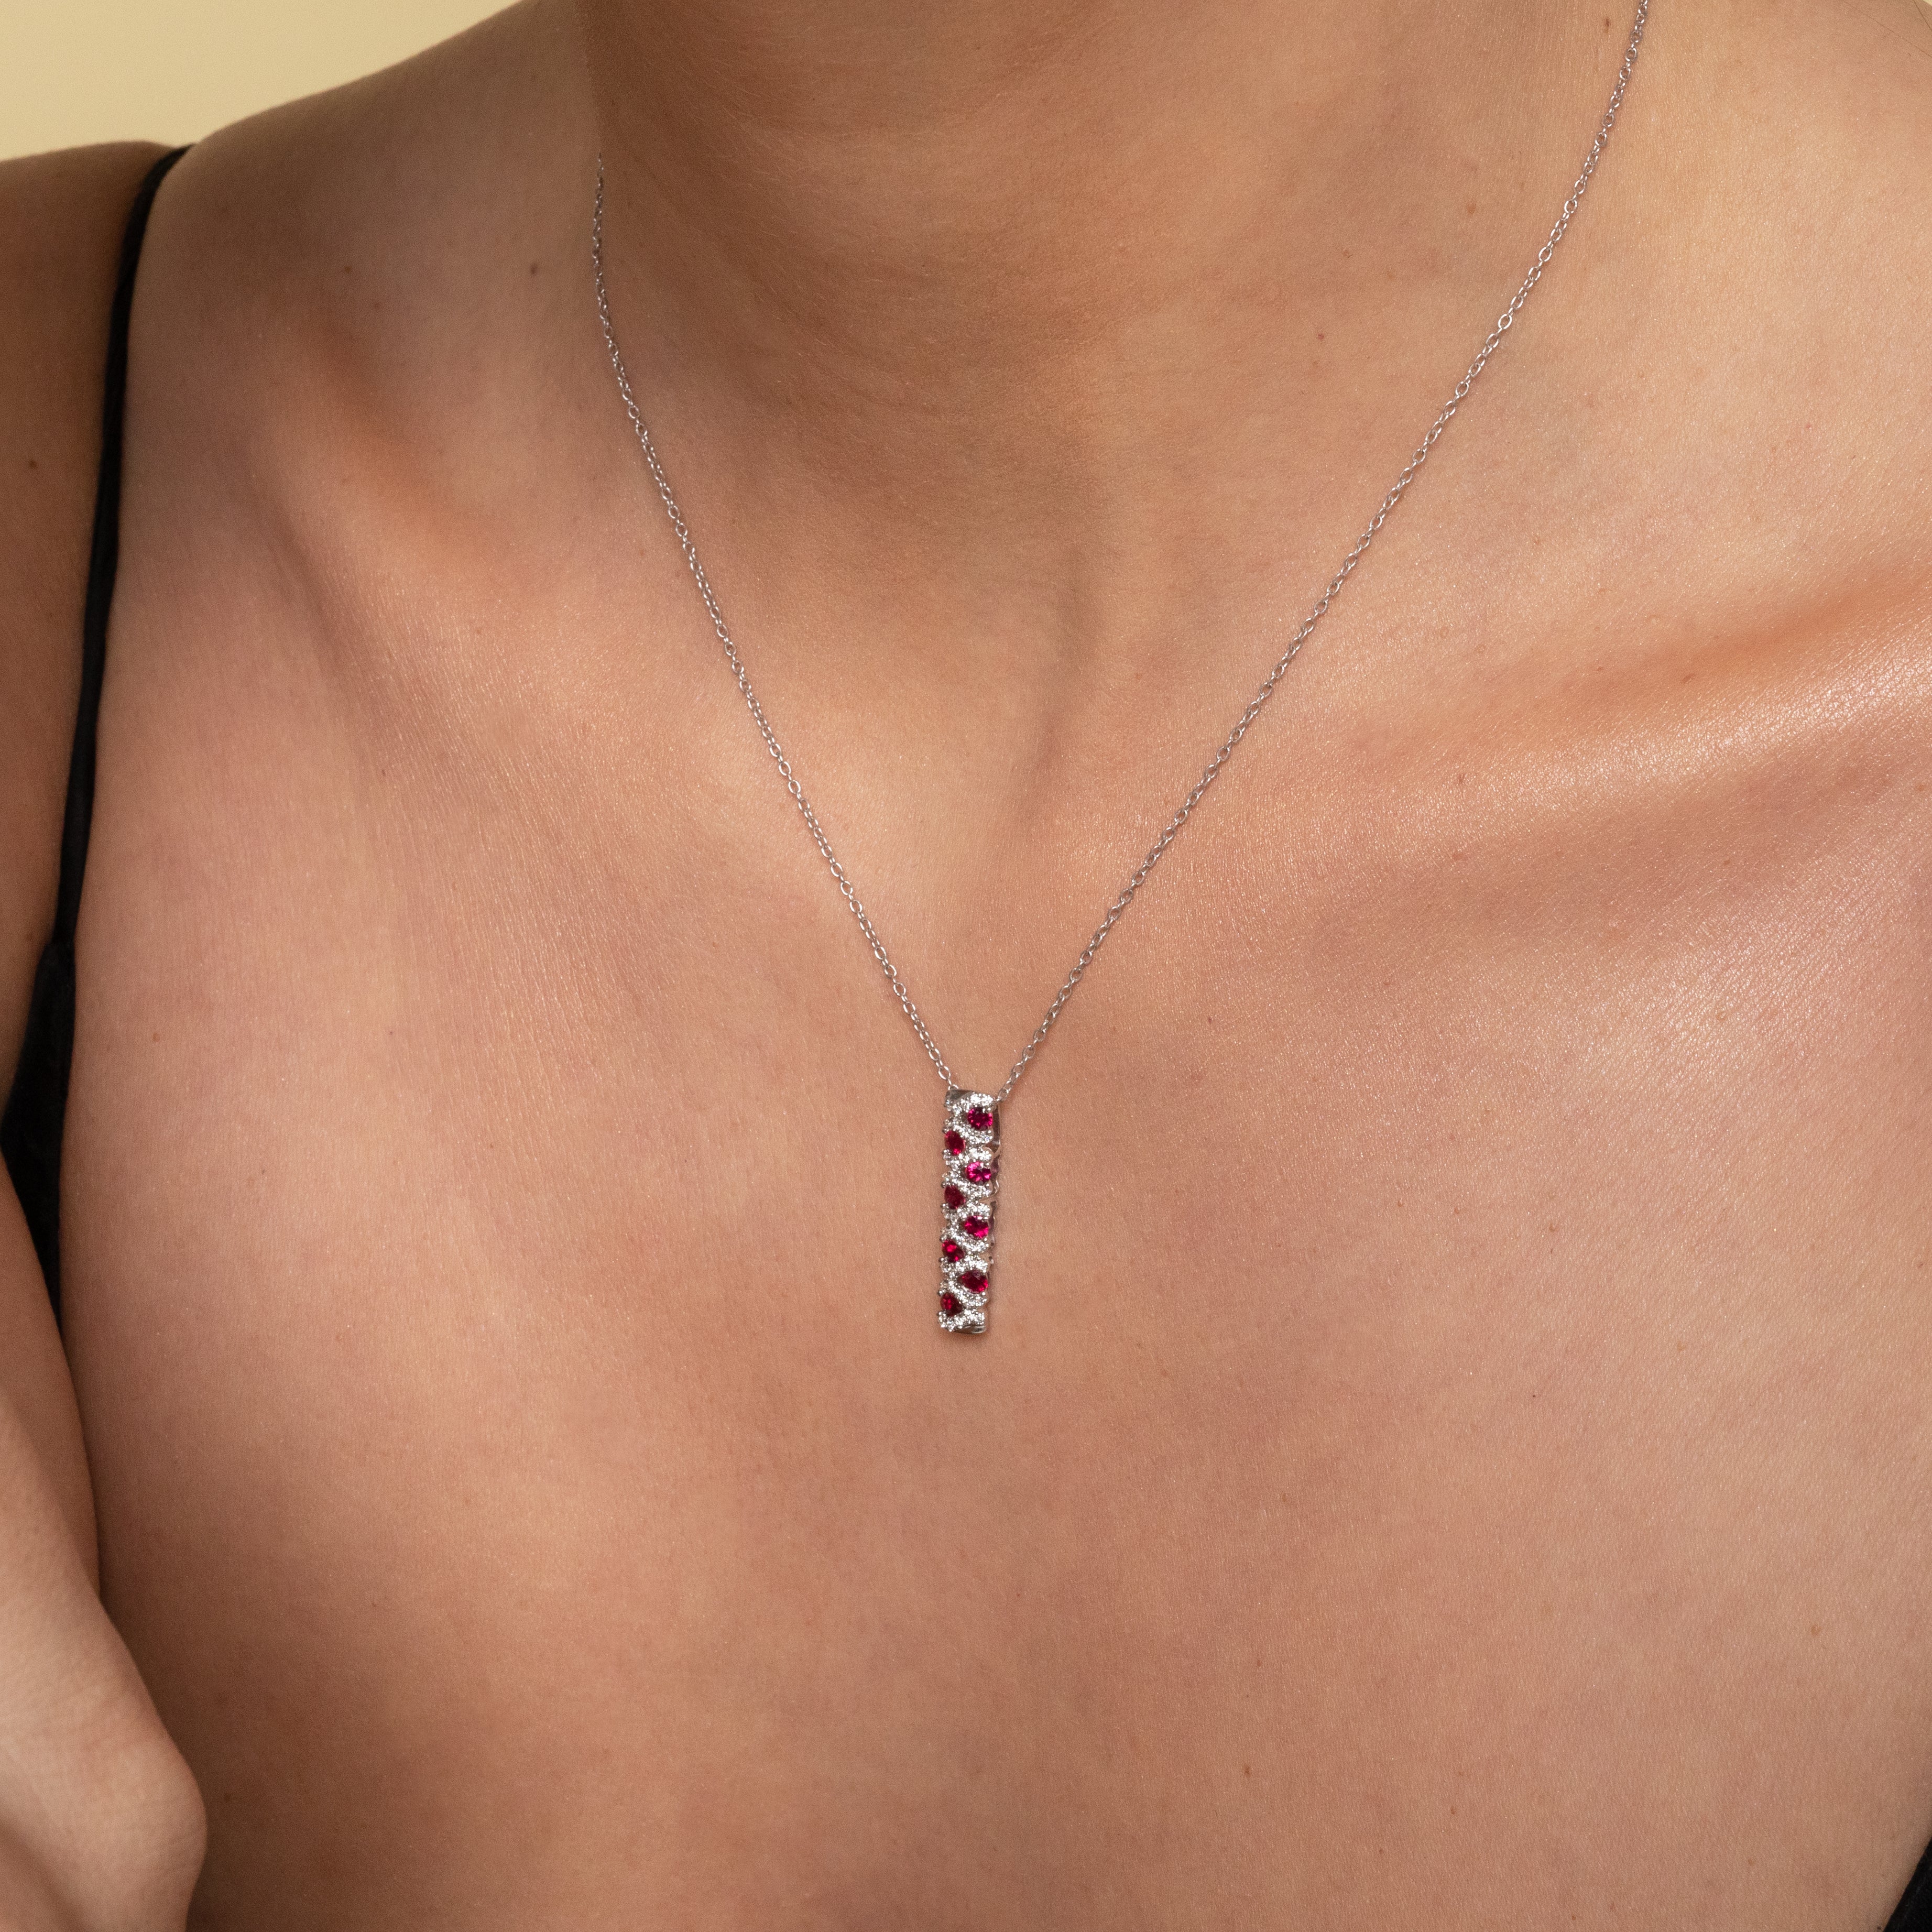 Stripe necklace with rubies and diamonds